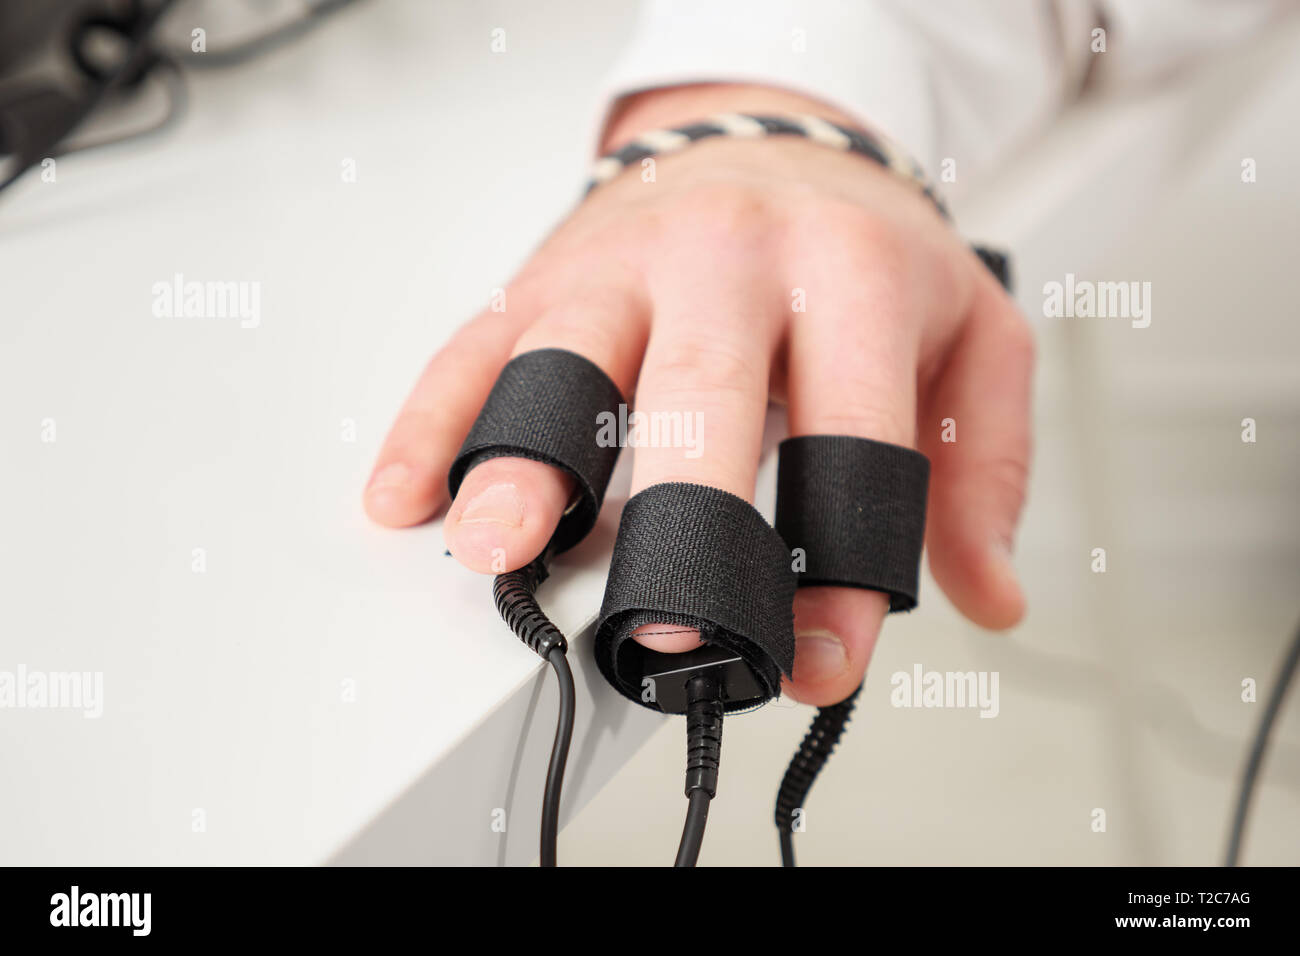 man's hands on which polygraph sensors are worn. Stock Photo